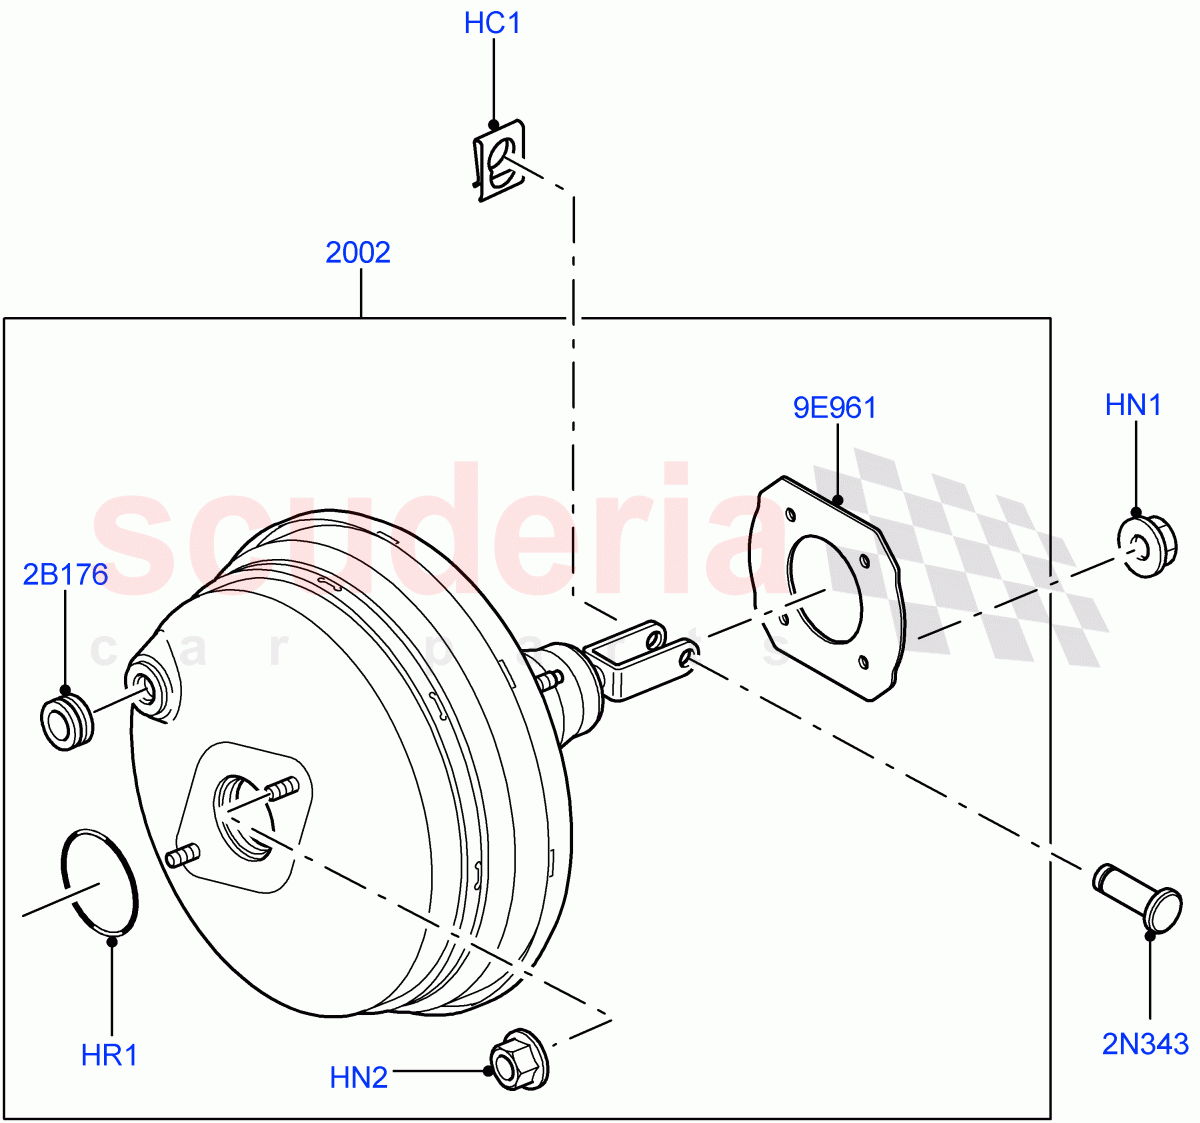 Brake Booster((V)FROMAA000001) of Land Rover Land Rover Discovery 4 (2010-2016) [3.0 DOHC GDI SC V6 Petrol]